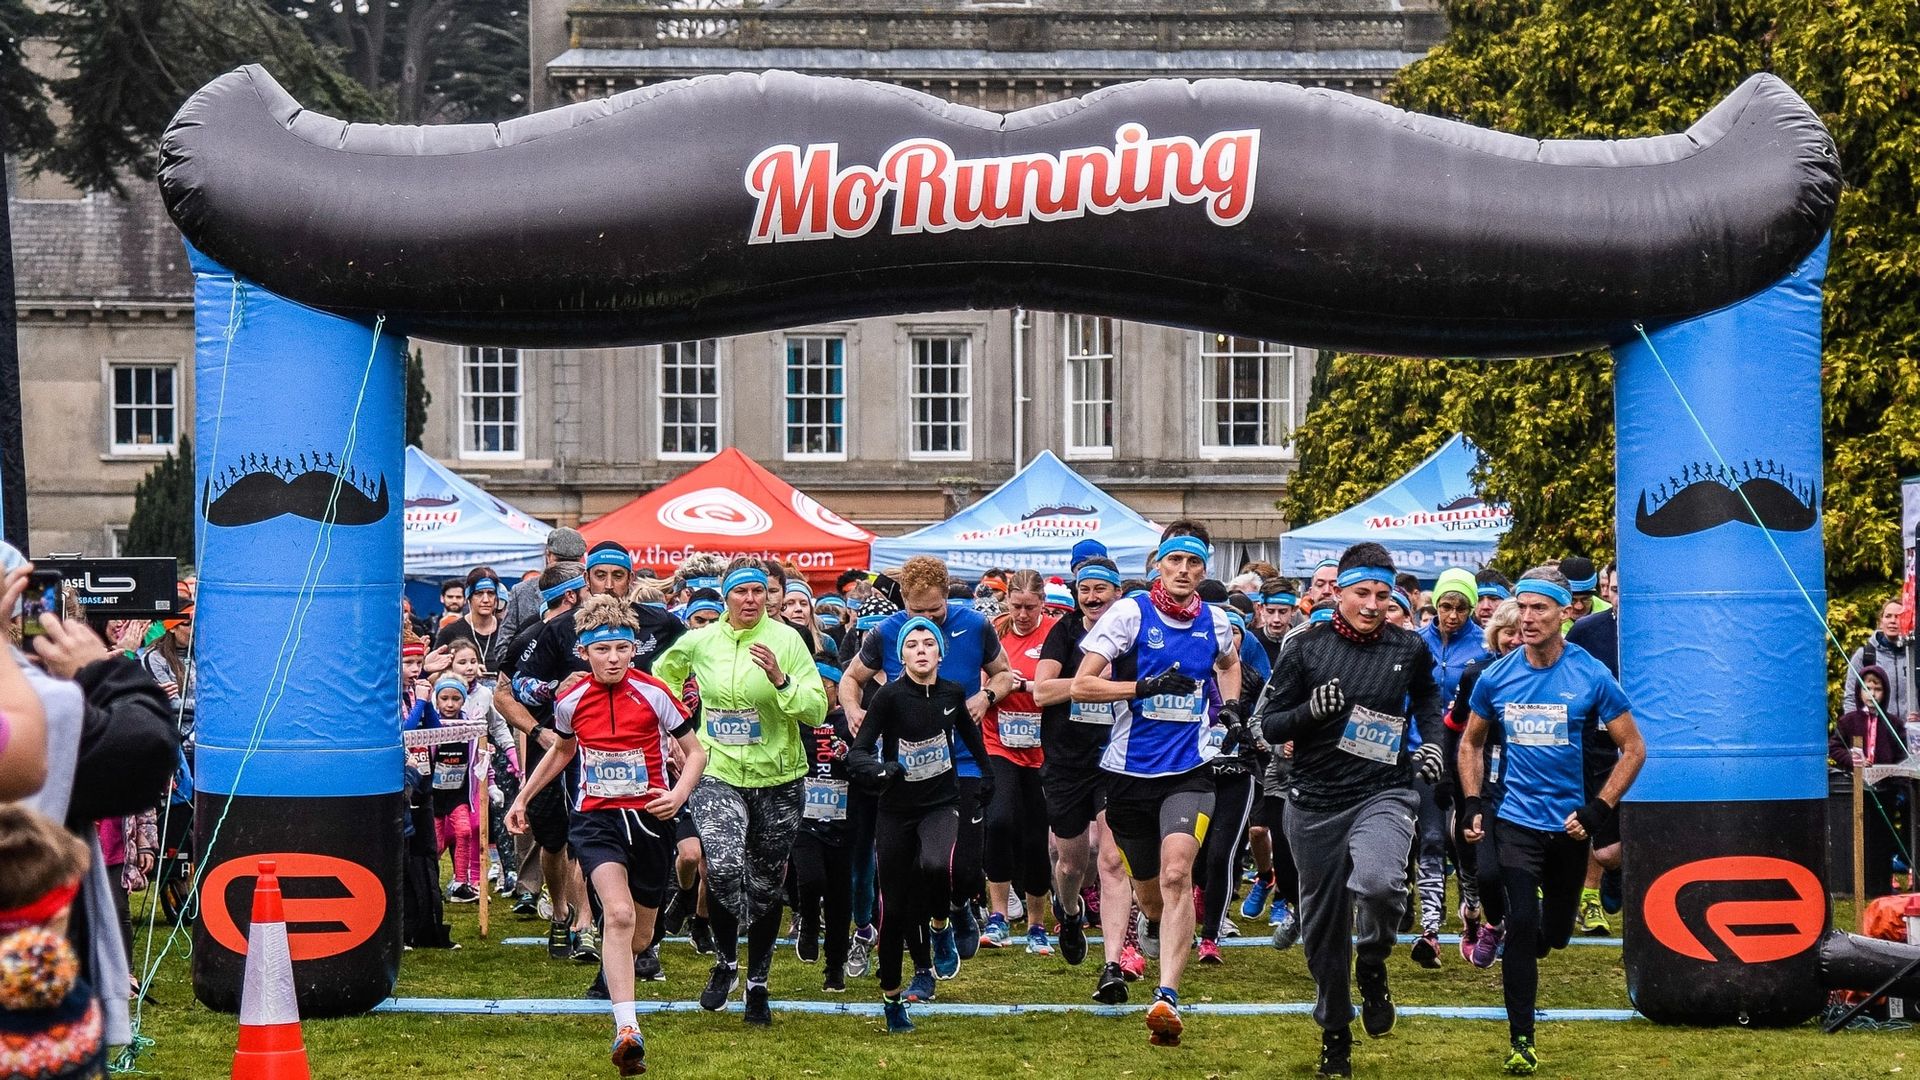 The runners set off at a Mo Running event.